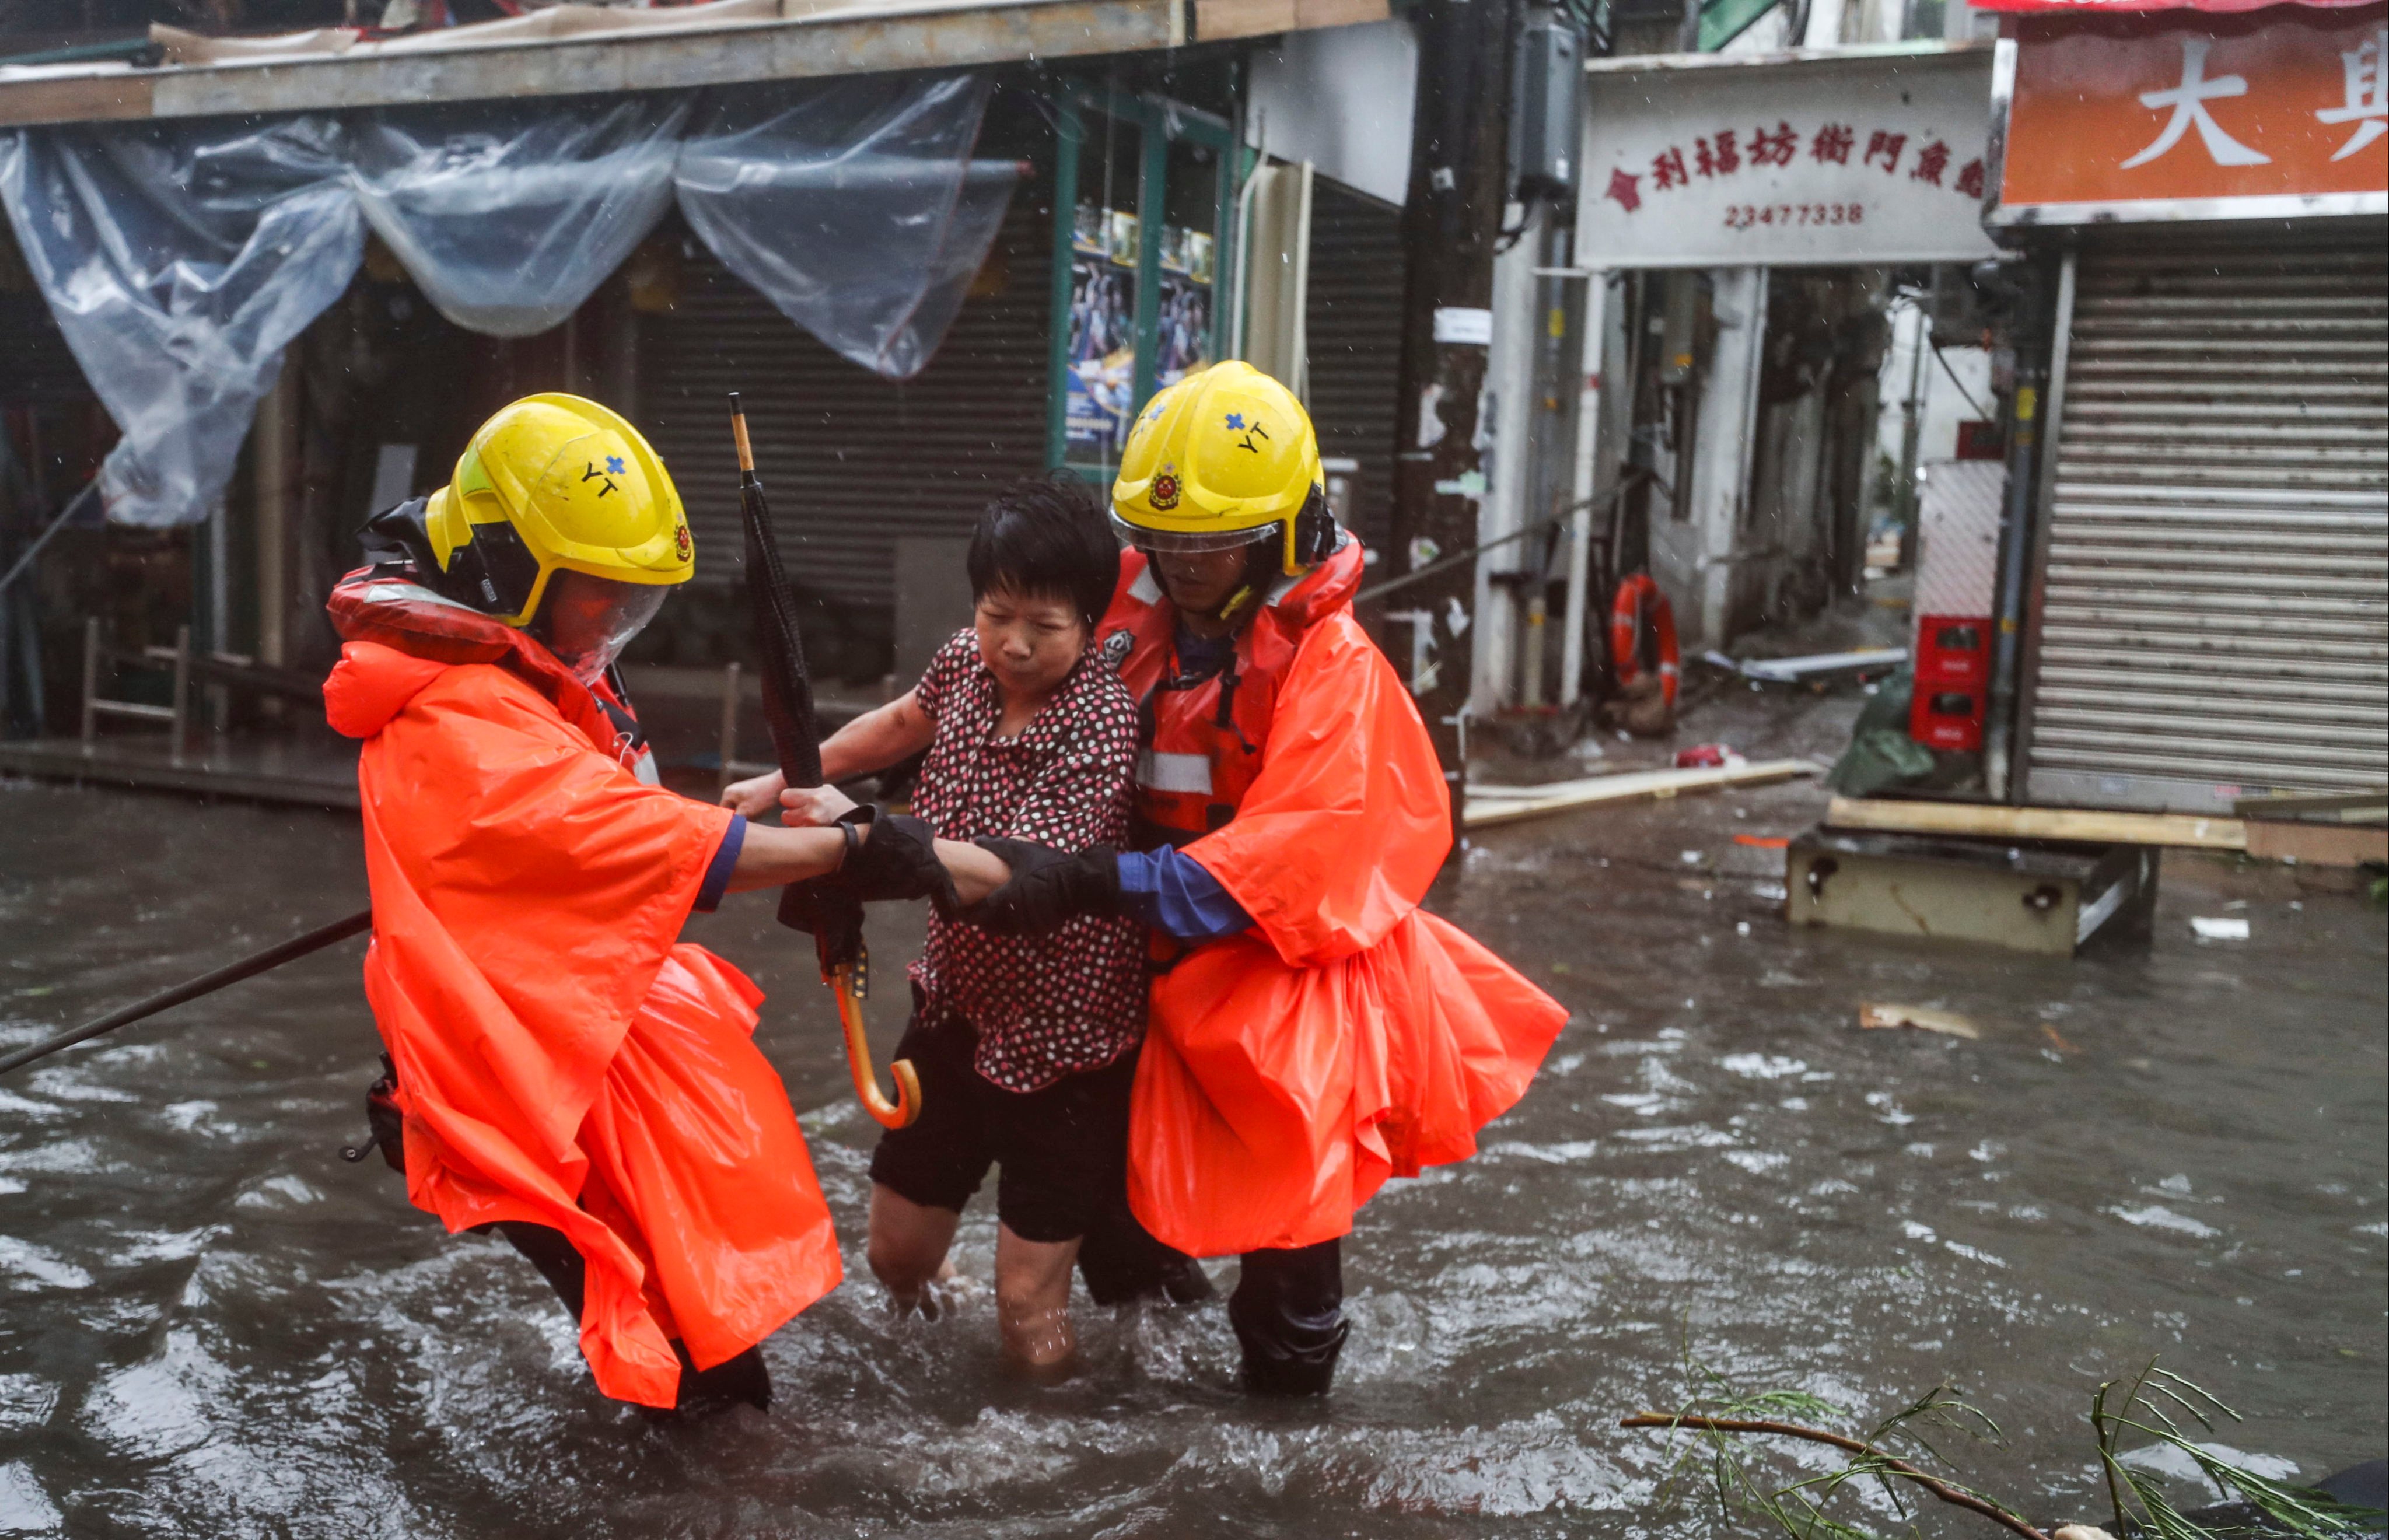 Firefighters help a woman through flooded streets on September 16, 2018, after strong winds and waves lashed Hong Kong when Typhoon Mangkhut made landfall. Photo: Winson Wong